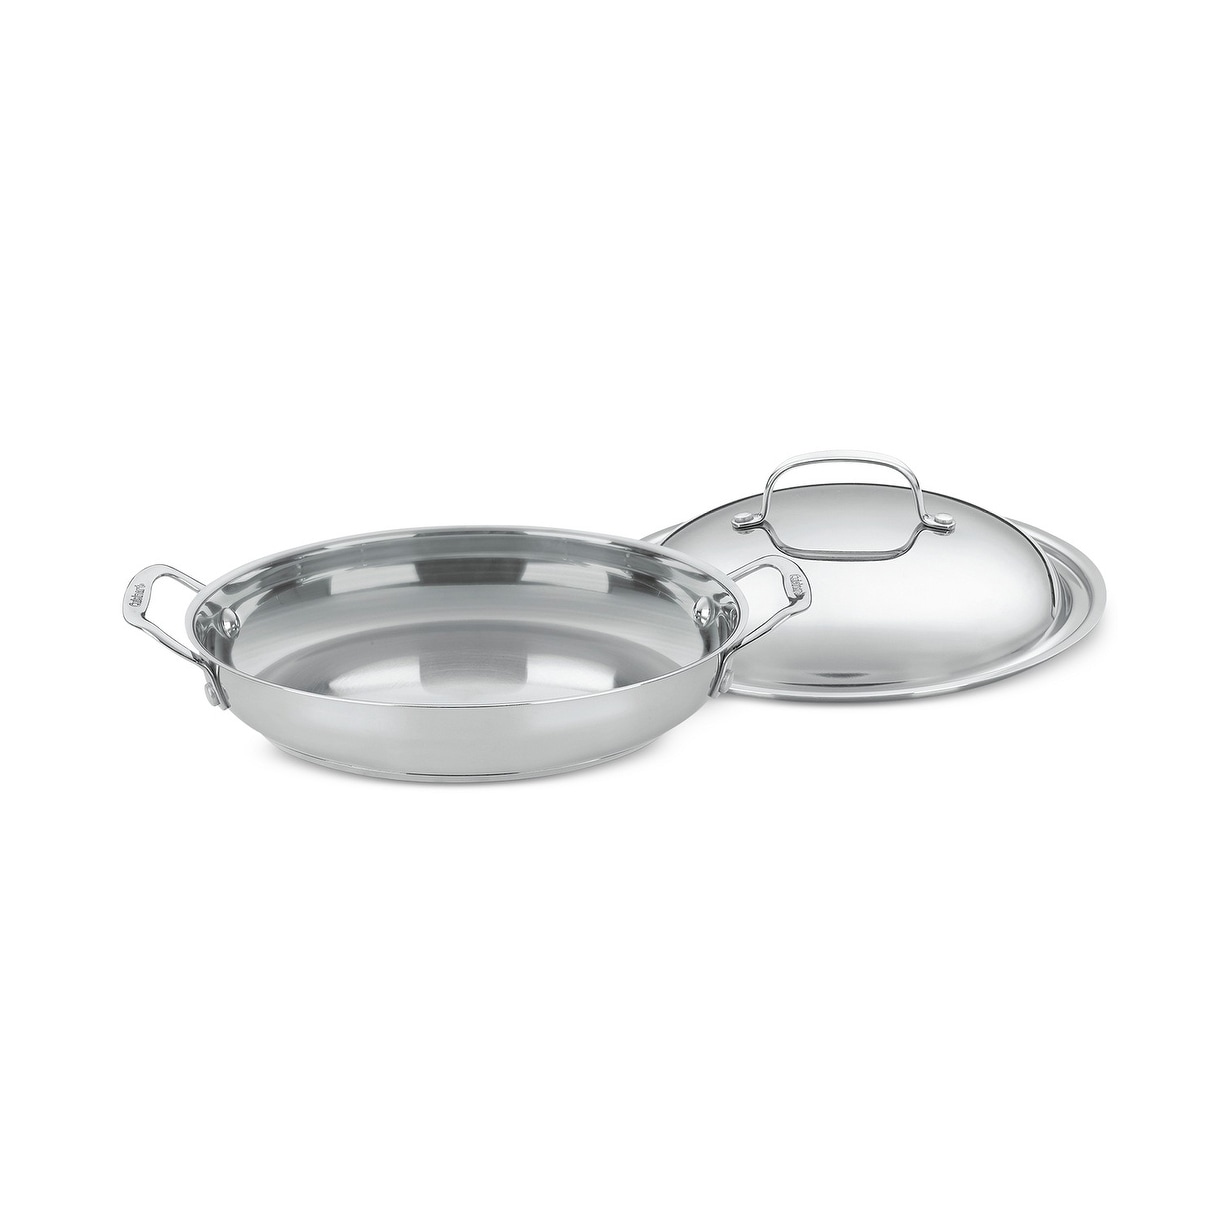 https://ak1.ostkcdn.com/images/products/is/images/direct/c94697edda49dff80c1c0a3da08ada1ededf3eee/Cuisinart-725-30D-Chef%27s-Classic-Stainless-12-Inch-Everyday-Pan-with-Dome-Cover.jpg